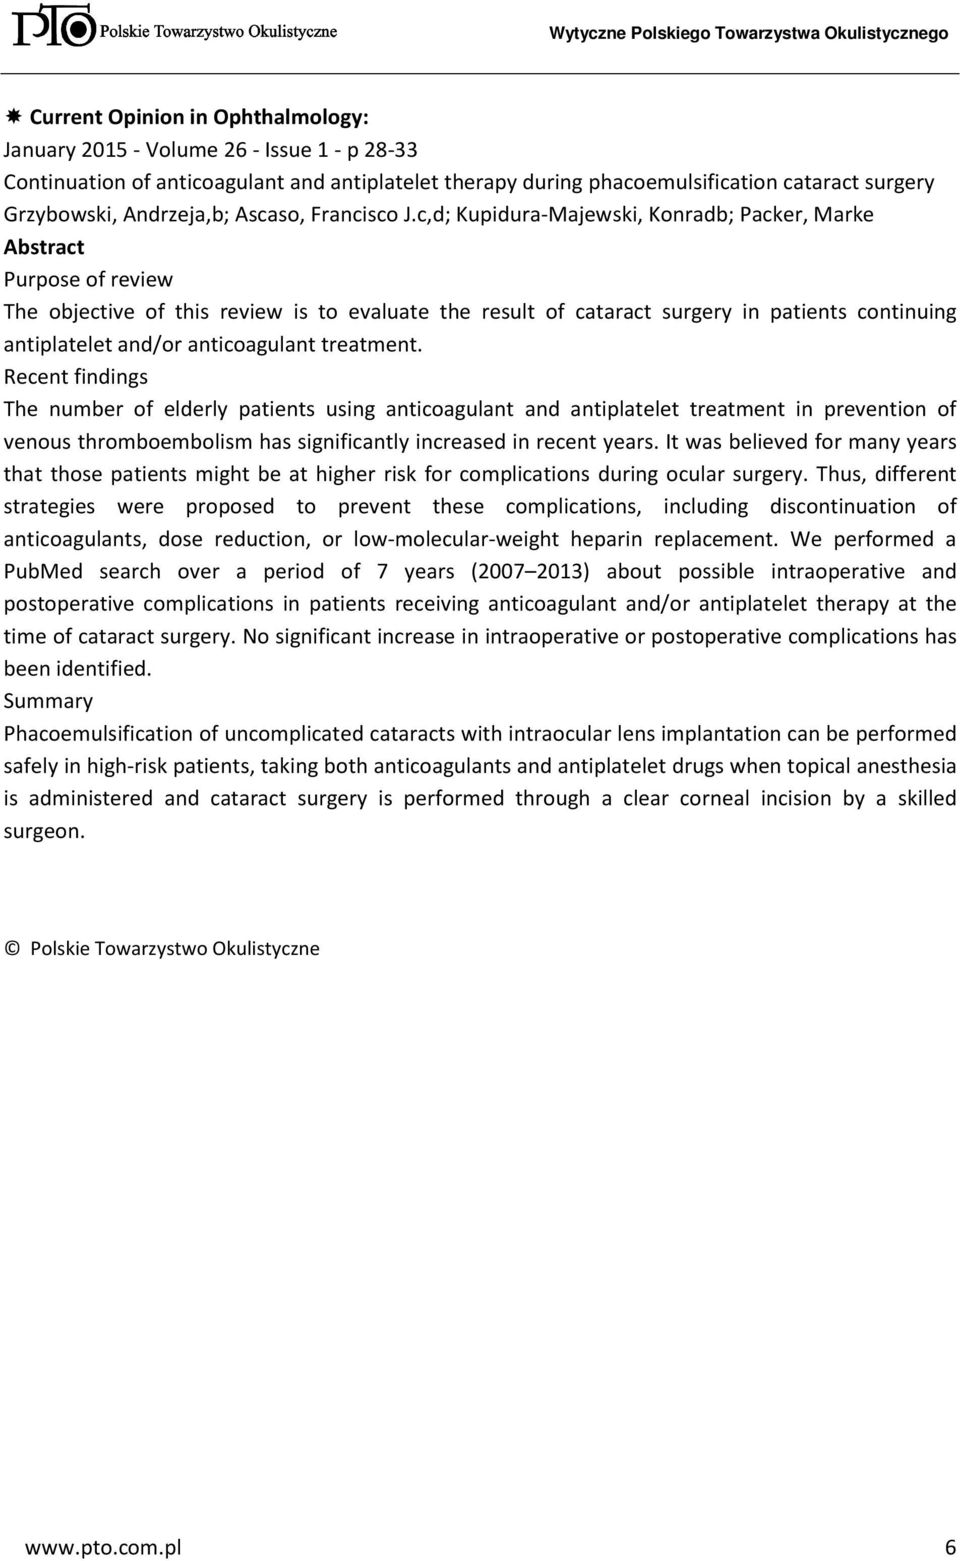 c,d; Kupidura-Majewski, Konradb; Packer, Marke Abstract Purpose of review The objective of this review is to evaluate the result of cataract surgery in patients continuing antiplatelet and/or